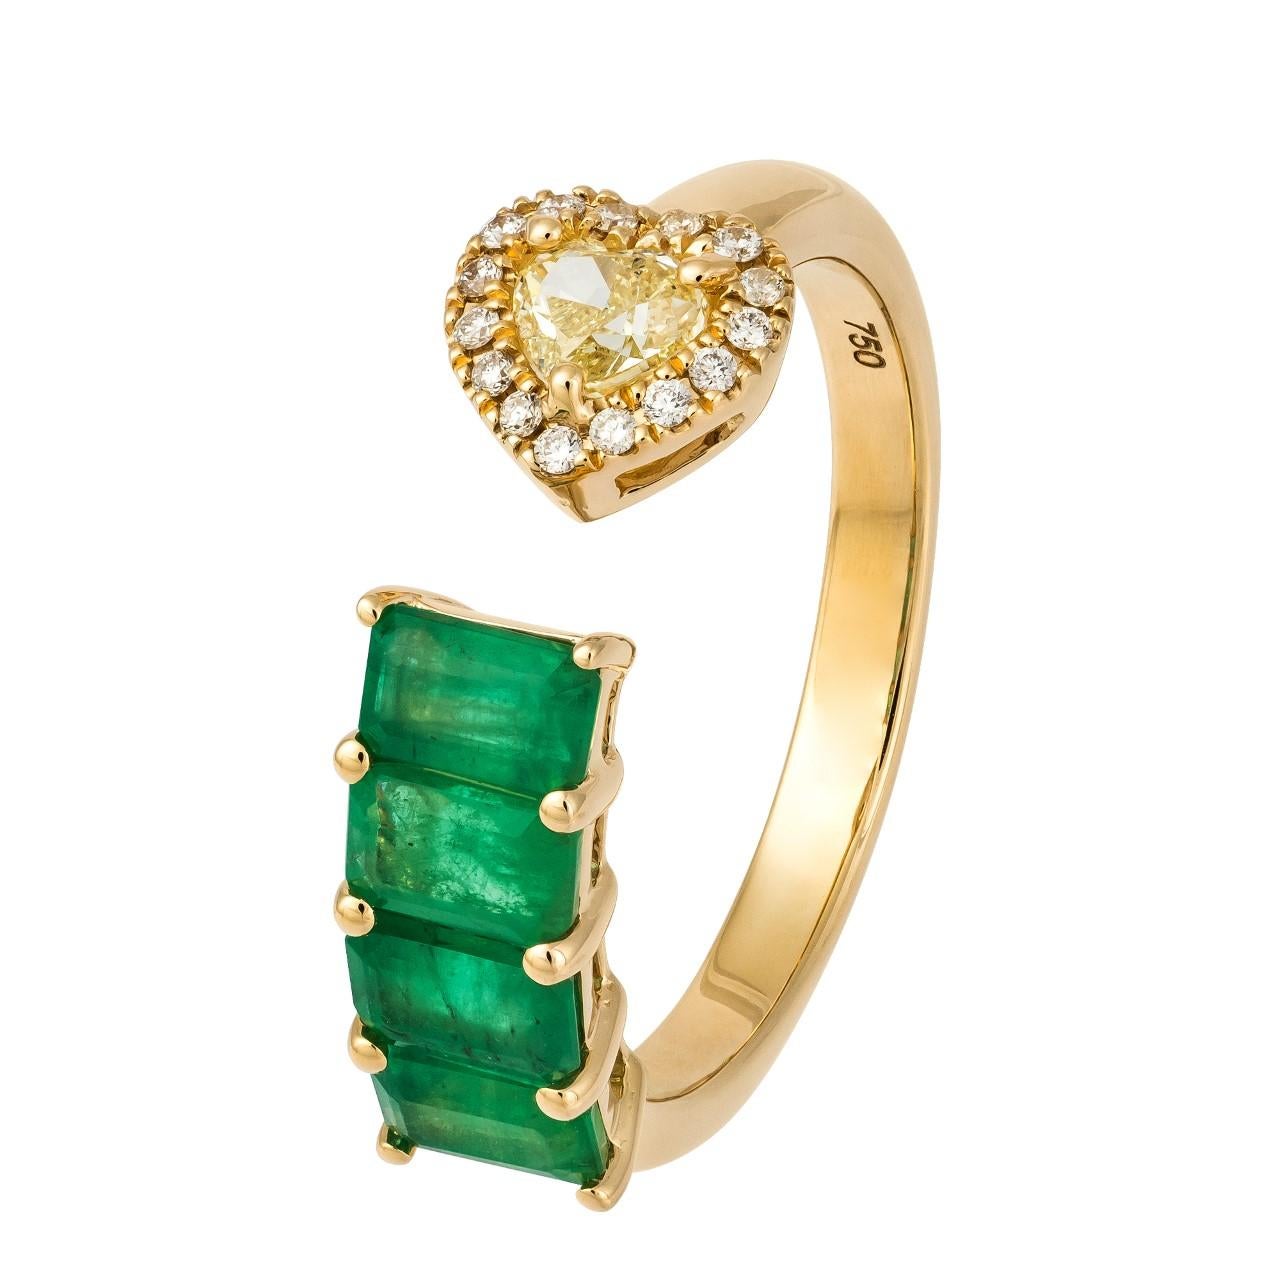 Ring Yellow Gold 18 K 
Diamond 0.07 Cts/15 Pcs
Emerald 1.10 Cts/4 Pcs
Yellow Diamond 0.24 Cts/1 Pcs

Weight 3,44 grams


With a heritage of ancient fine Swiss jewelry traditions, NATKINA is a Geneva based jewellery brand, which creates modern